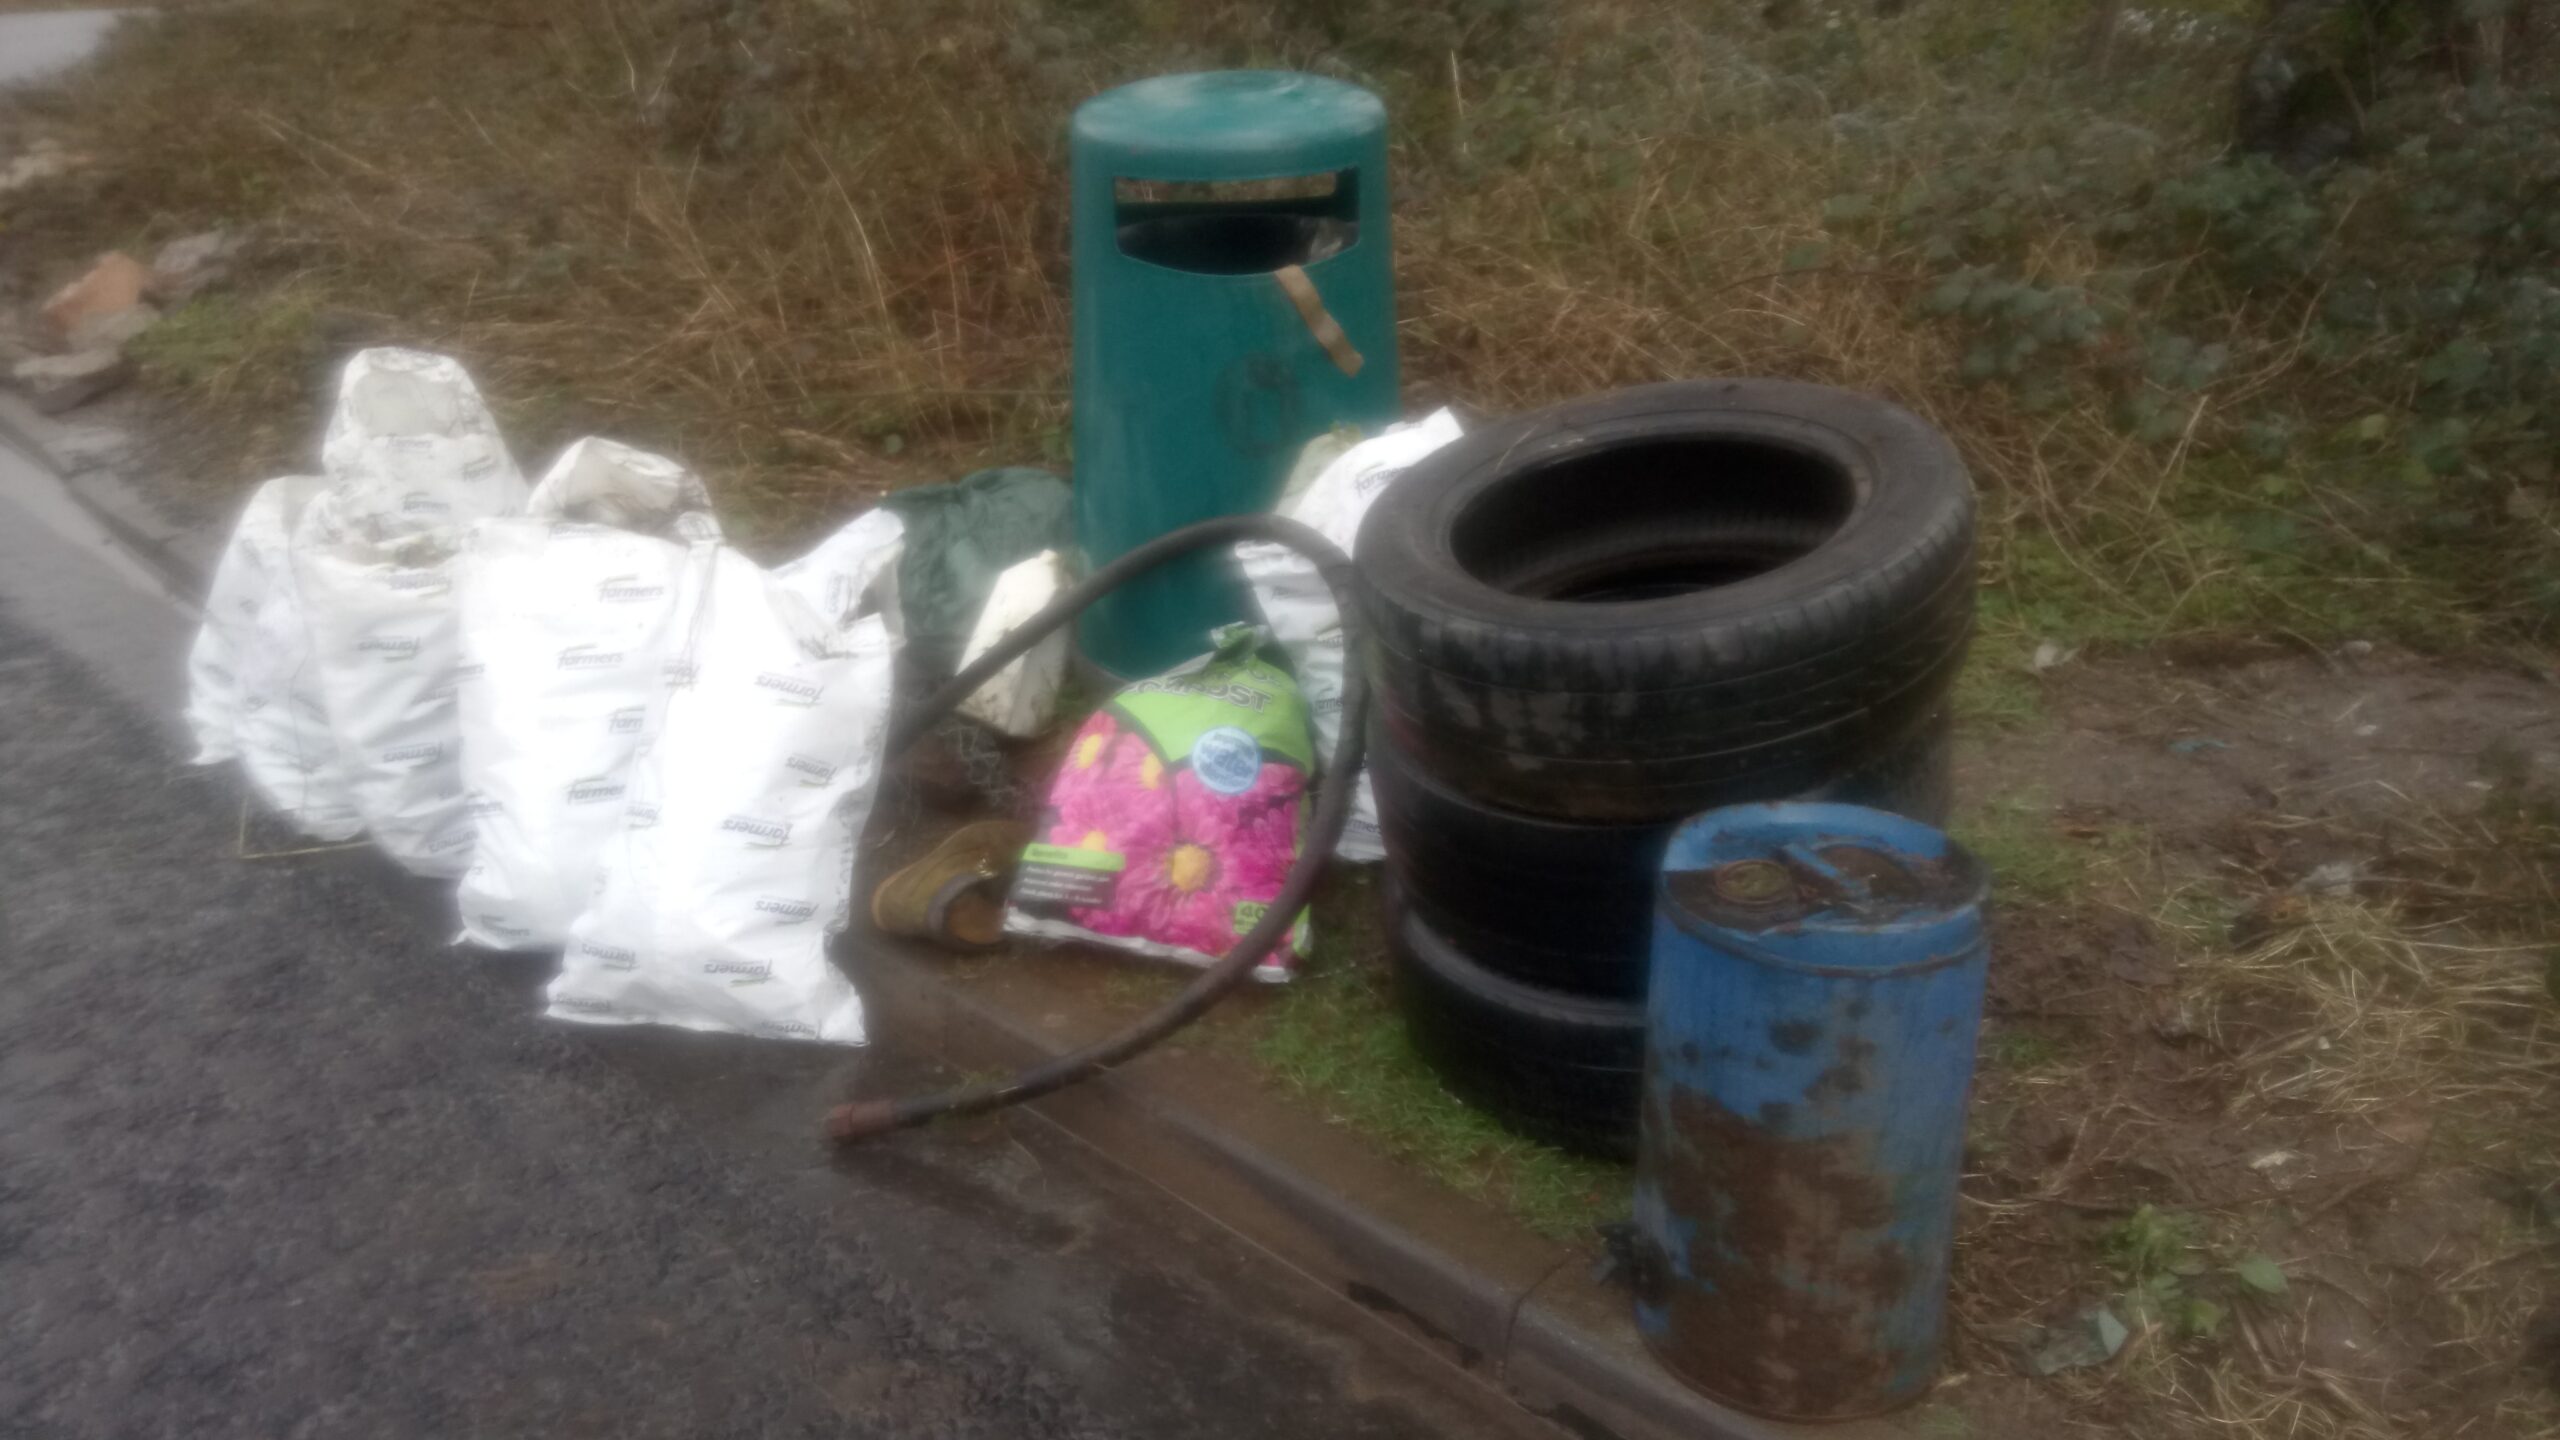 Collected waste in bags, Hall Bank Layby